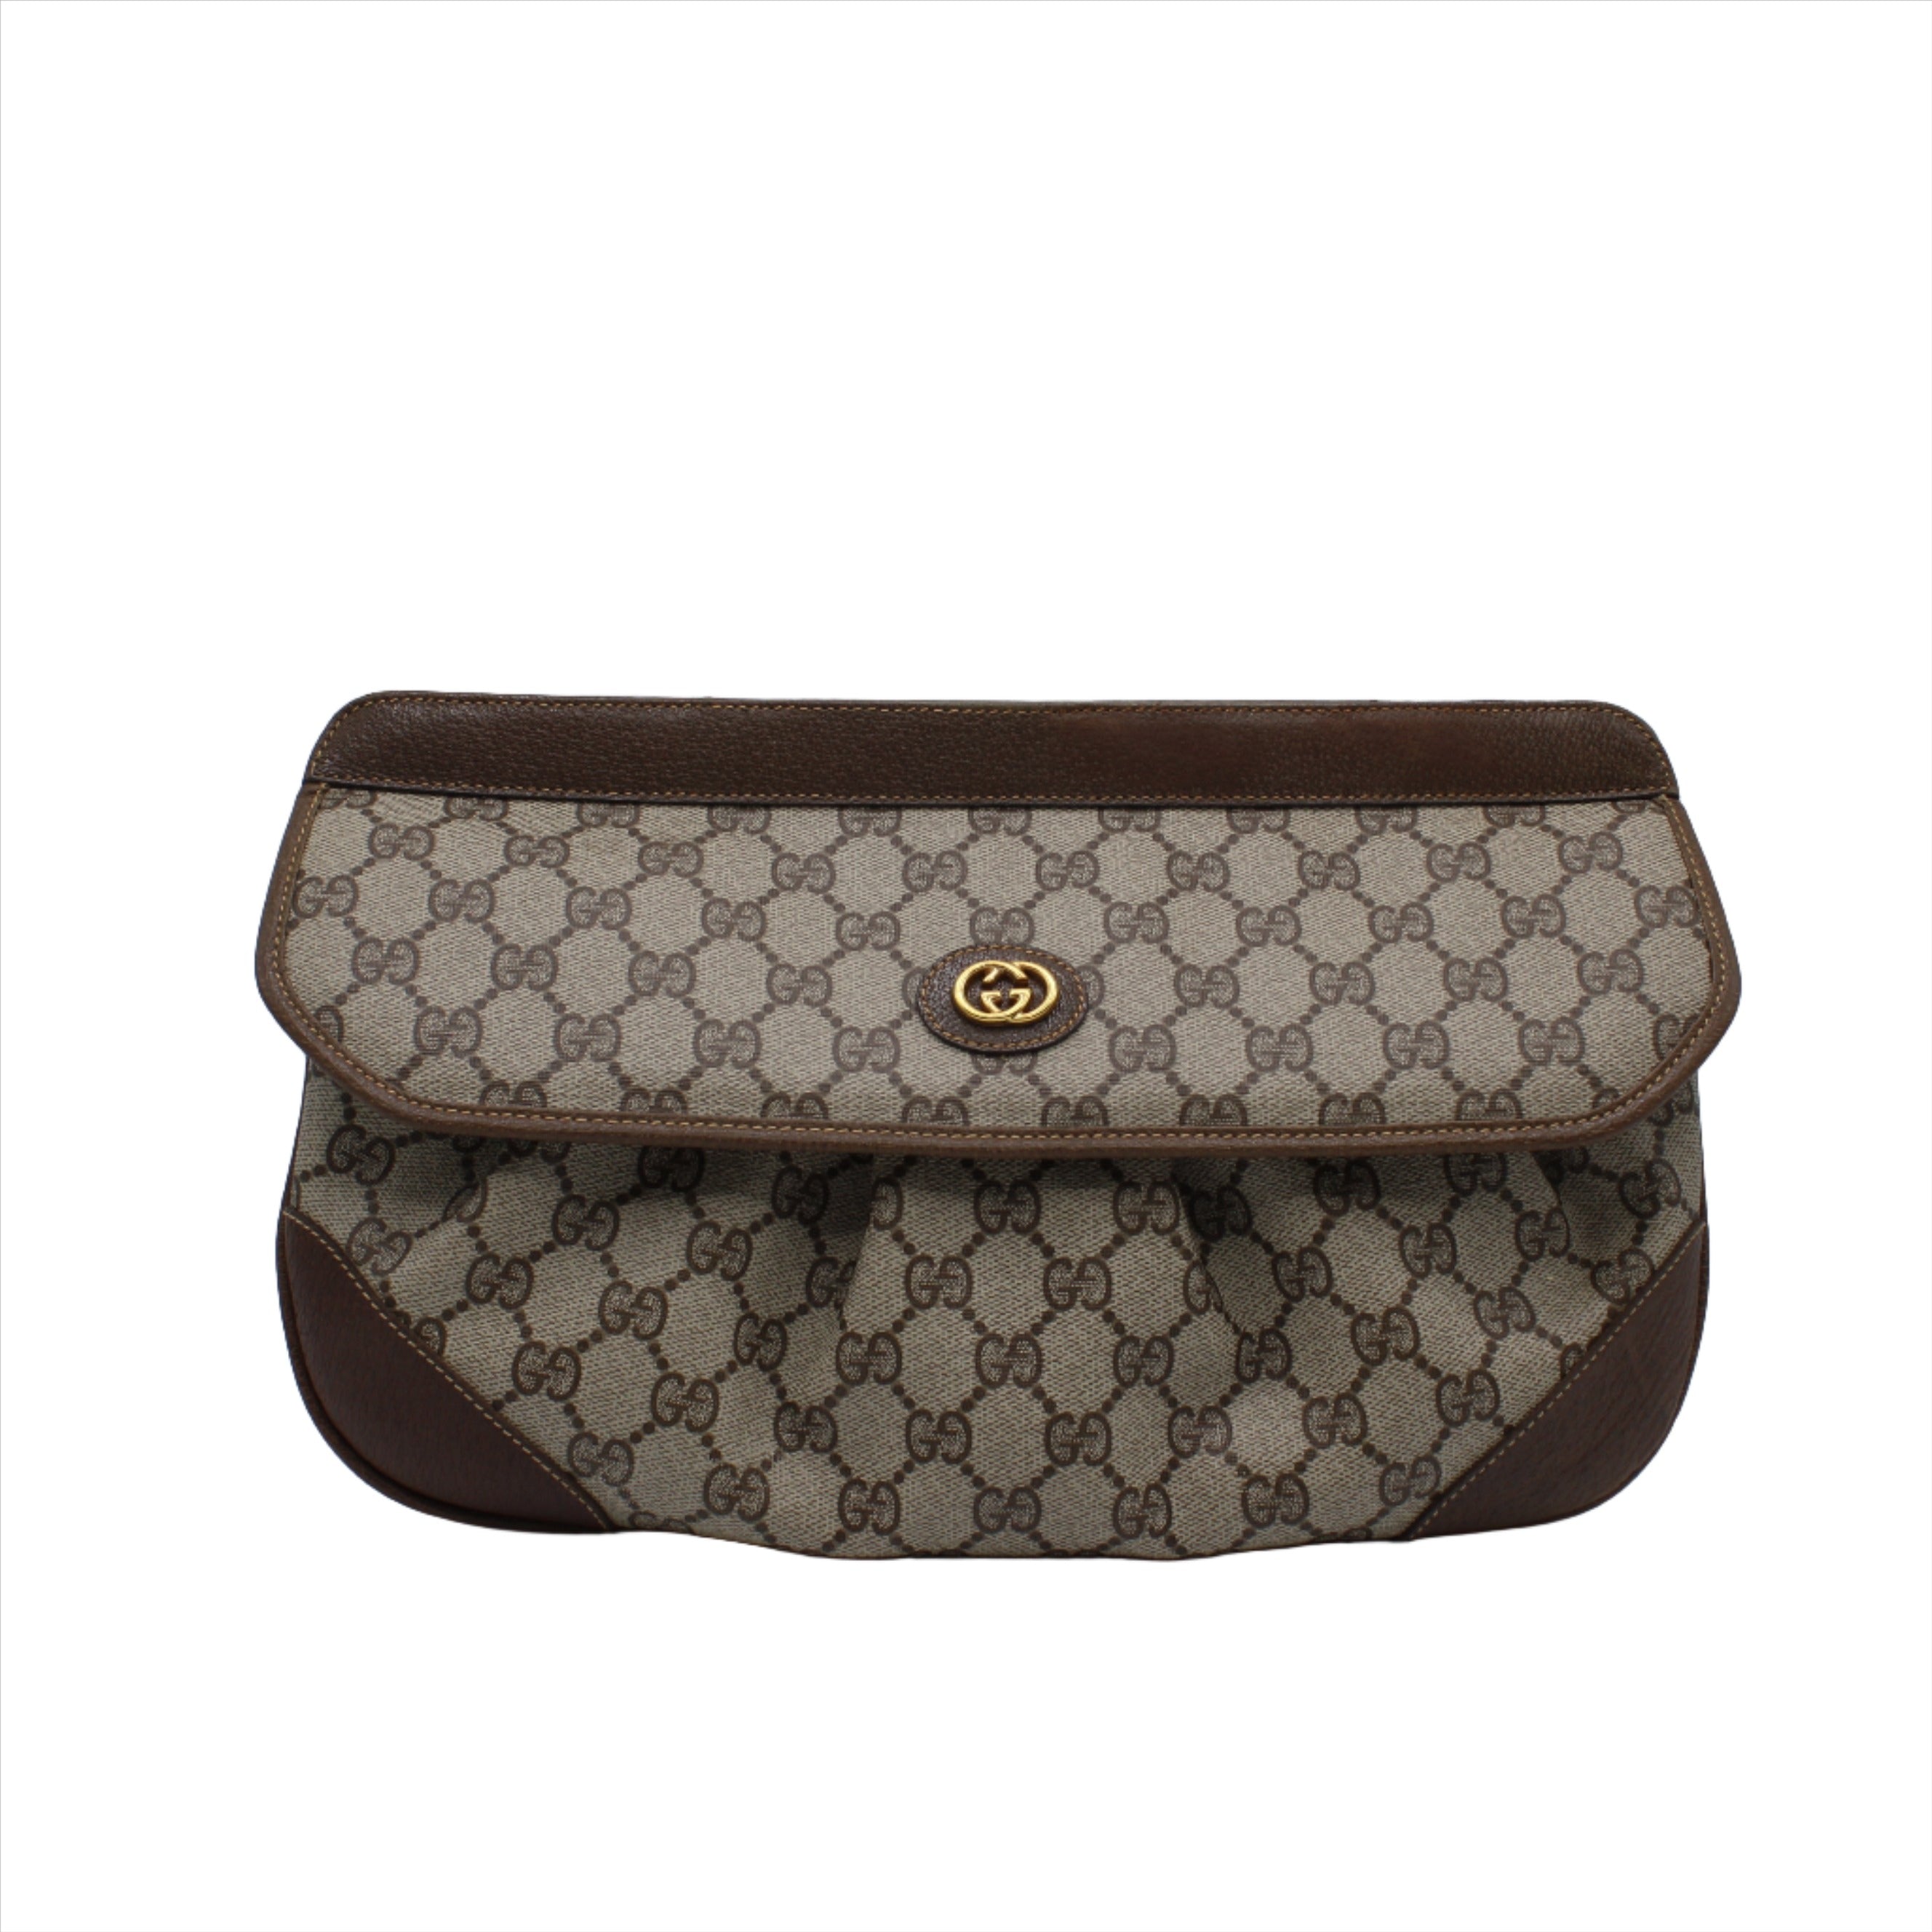 Gucci Ophidia GG Monogram Brown Canvas and Leather Clutch Bag